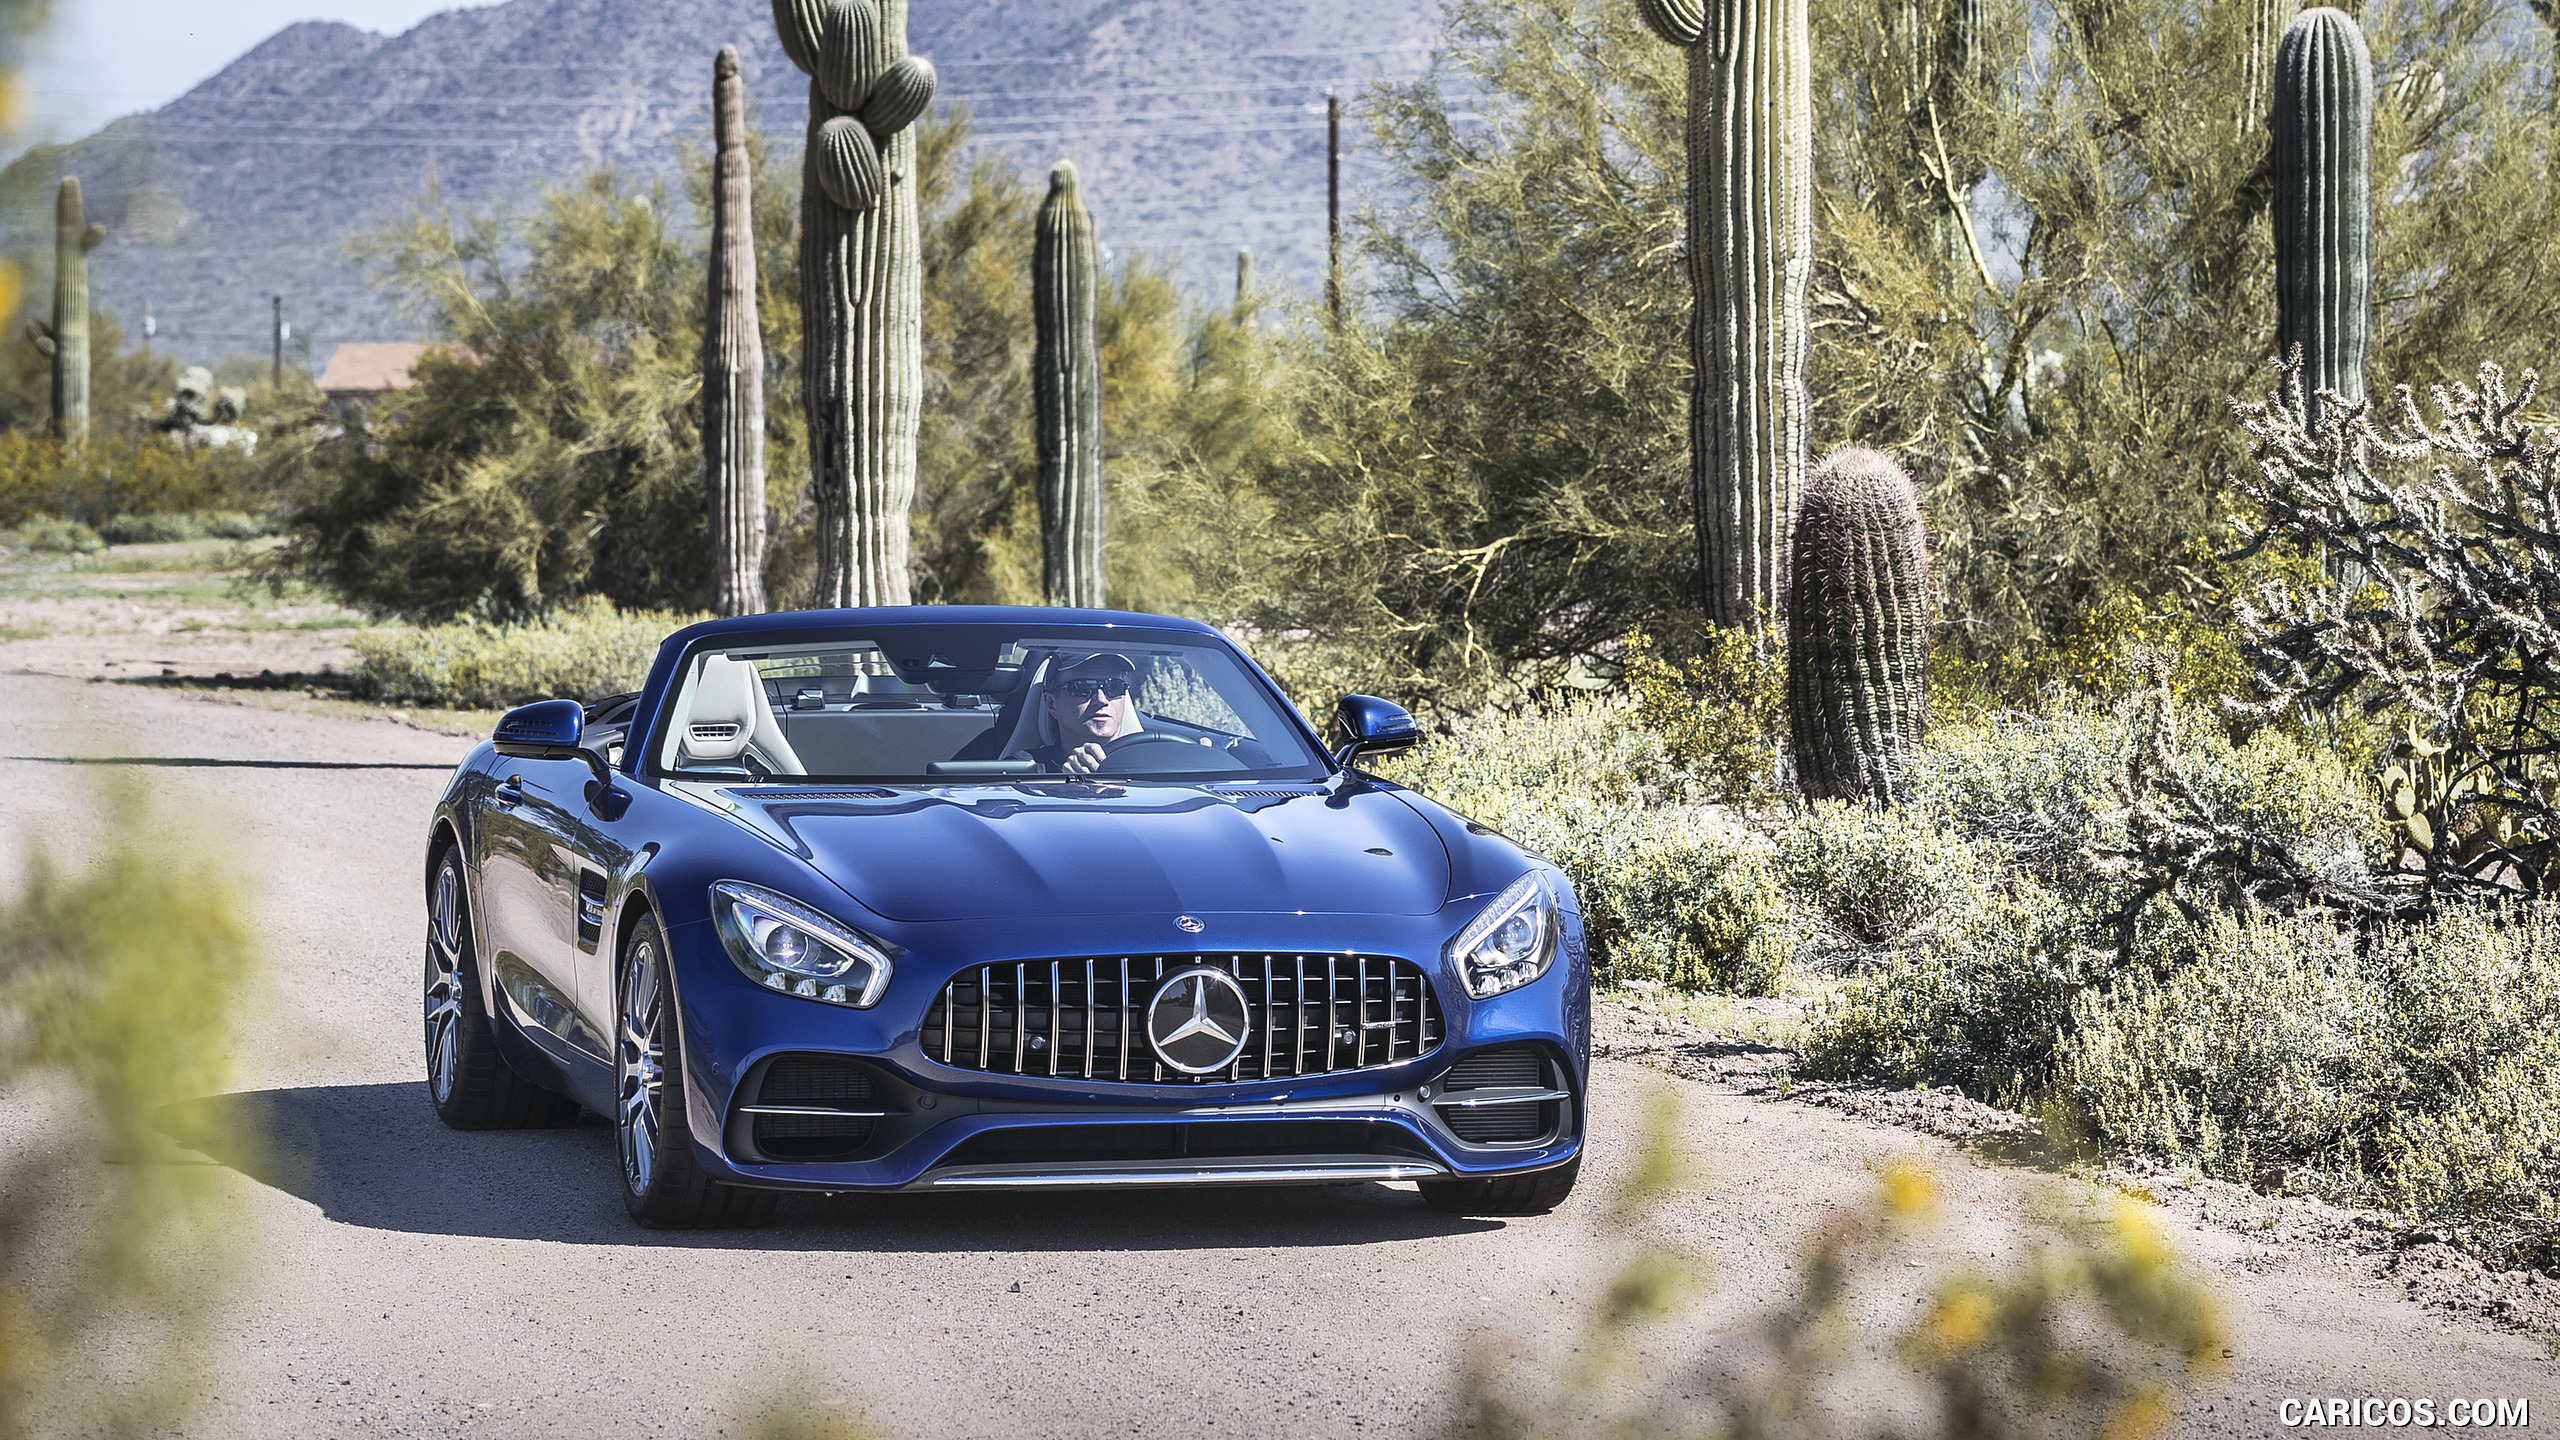 2018 Mercedes-AMG GT Roadster - Front, #113 of 350